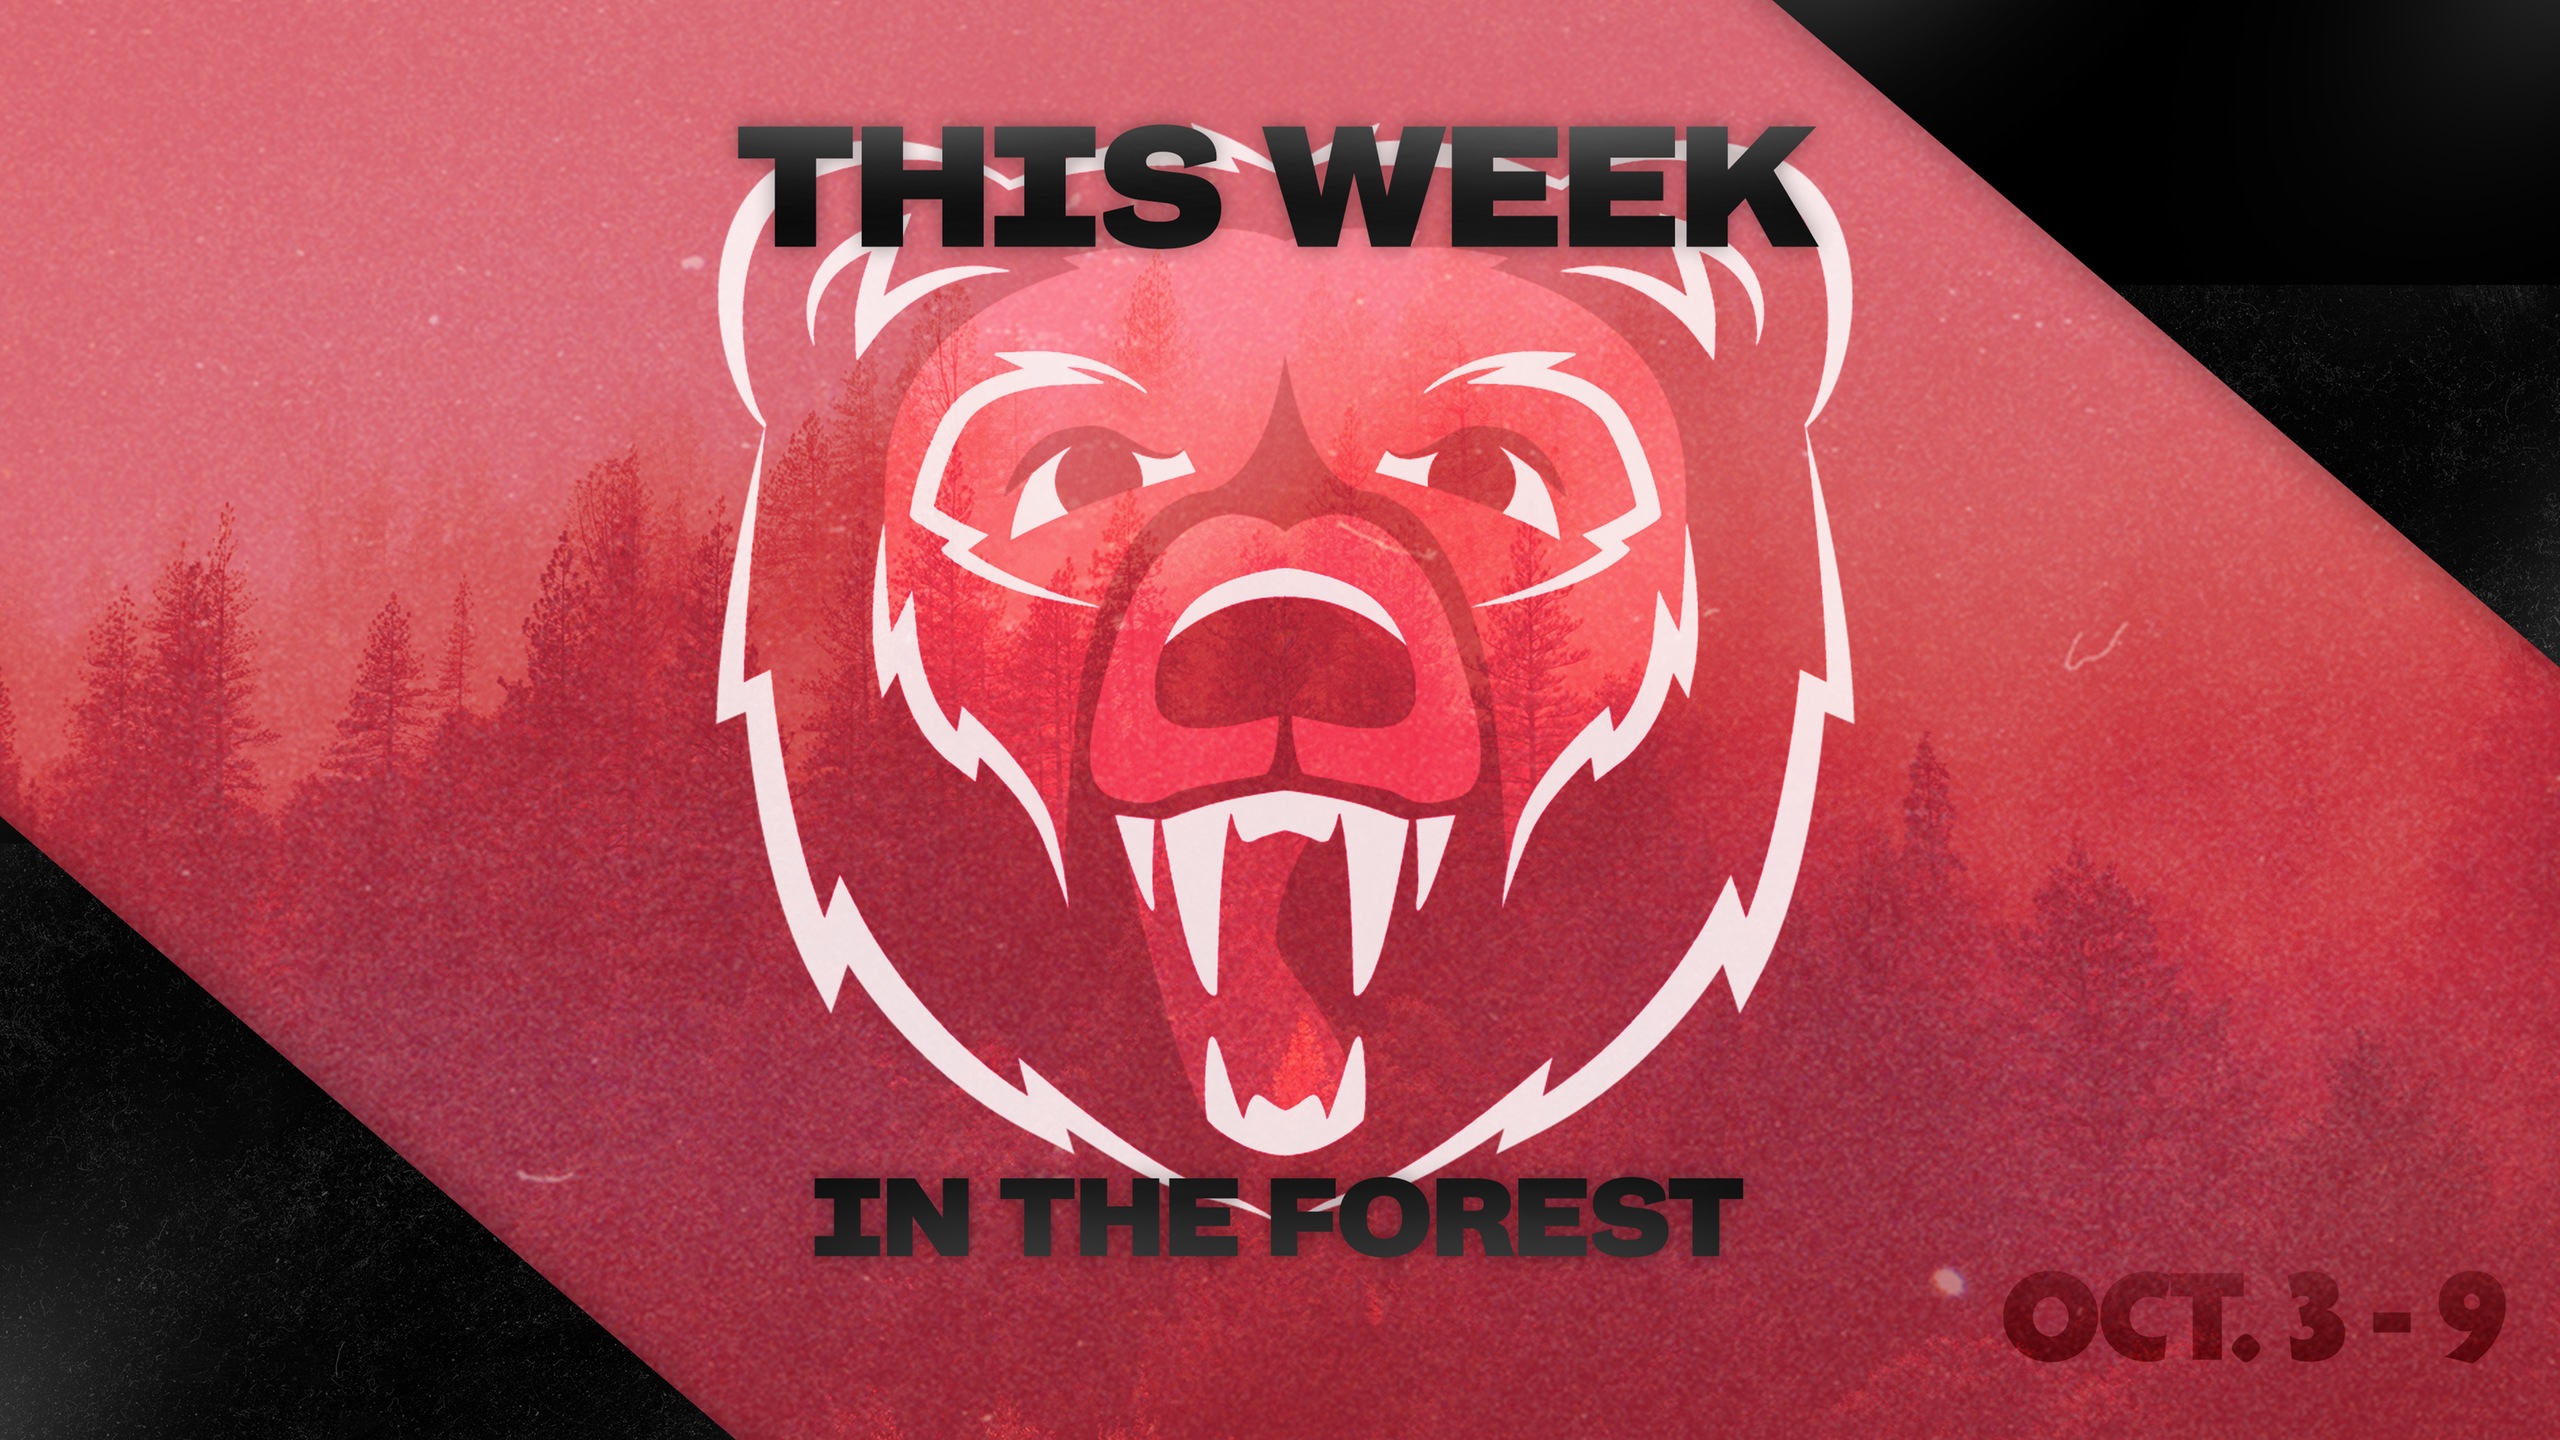 This Week in The Forest Oct. 3-9